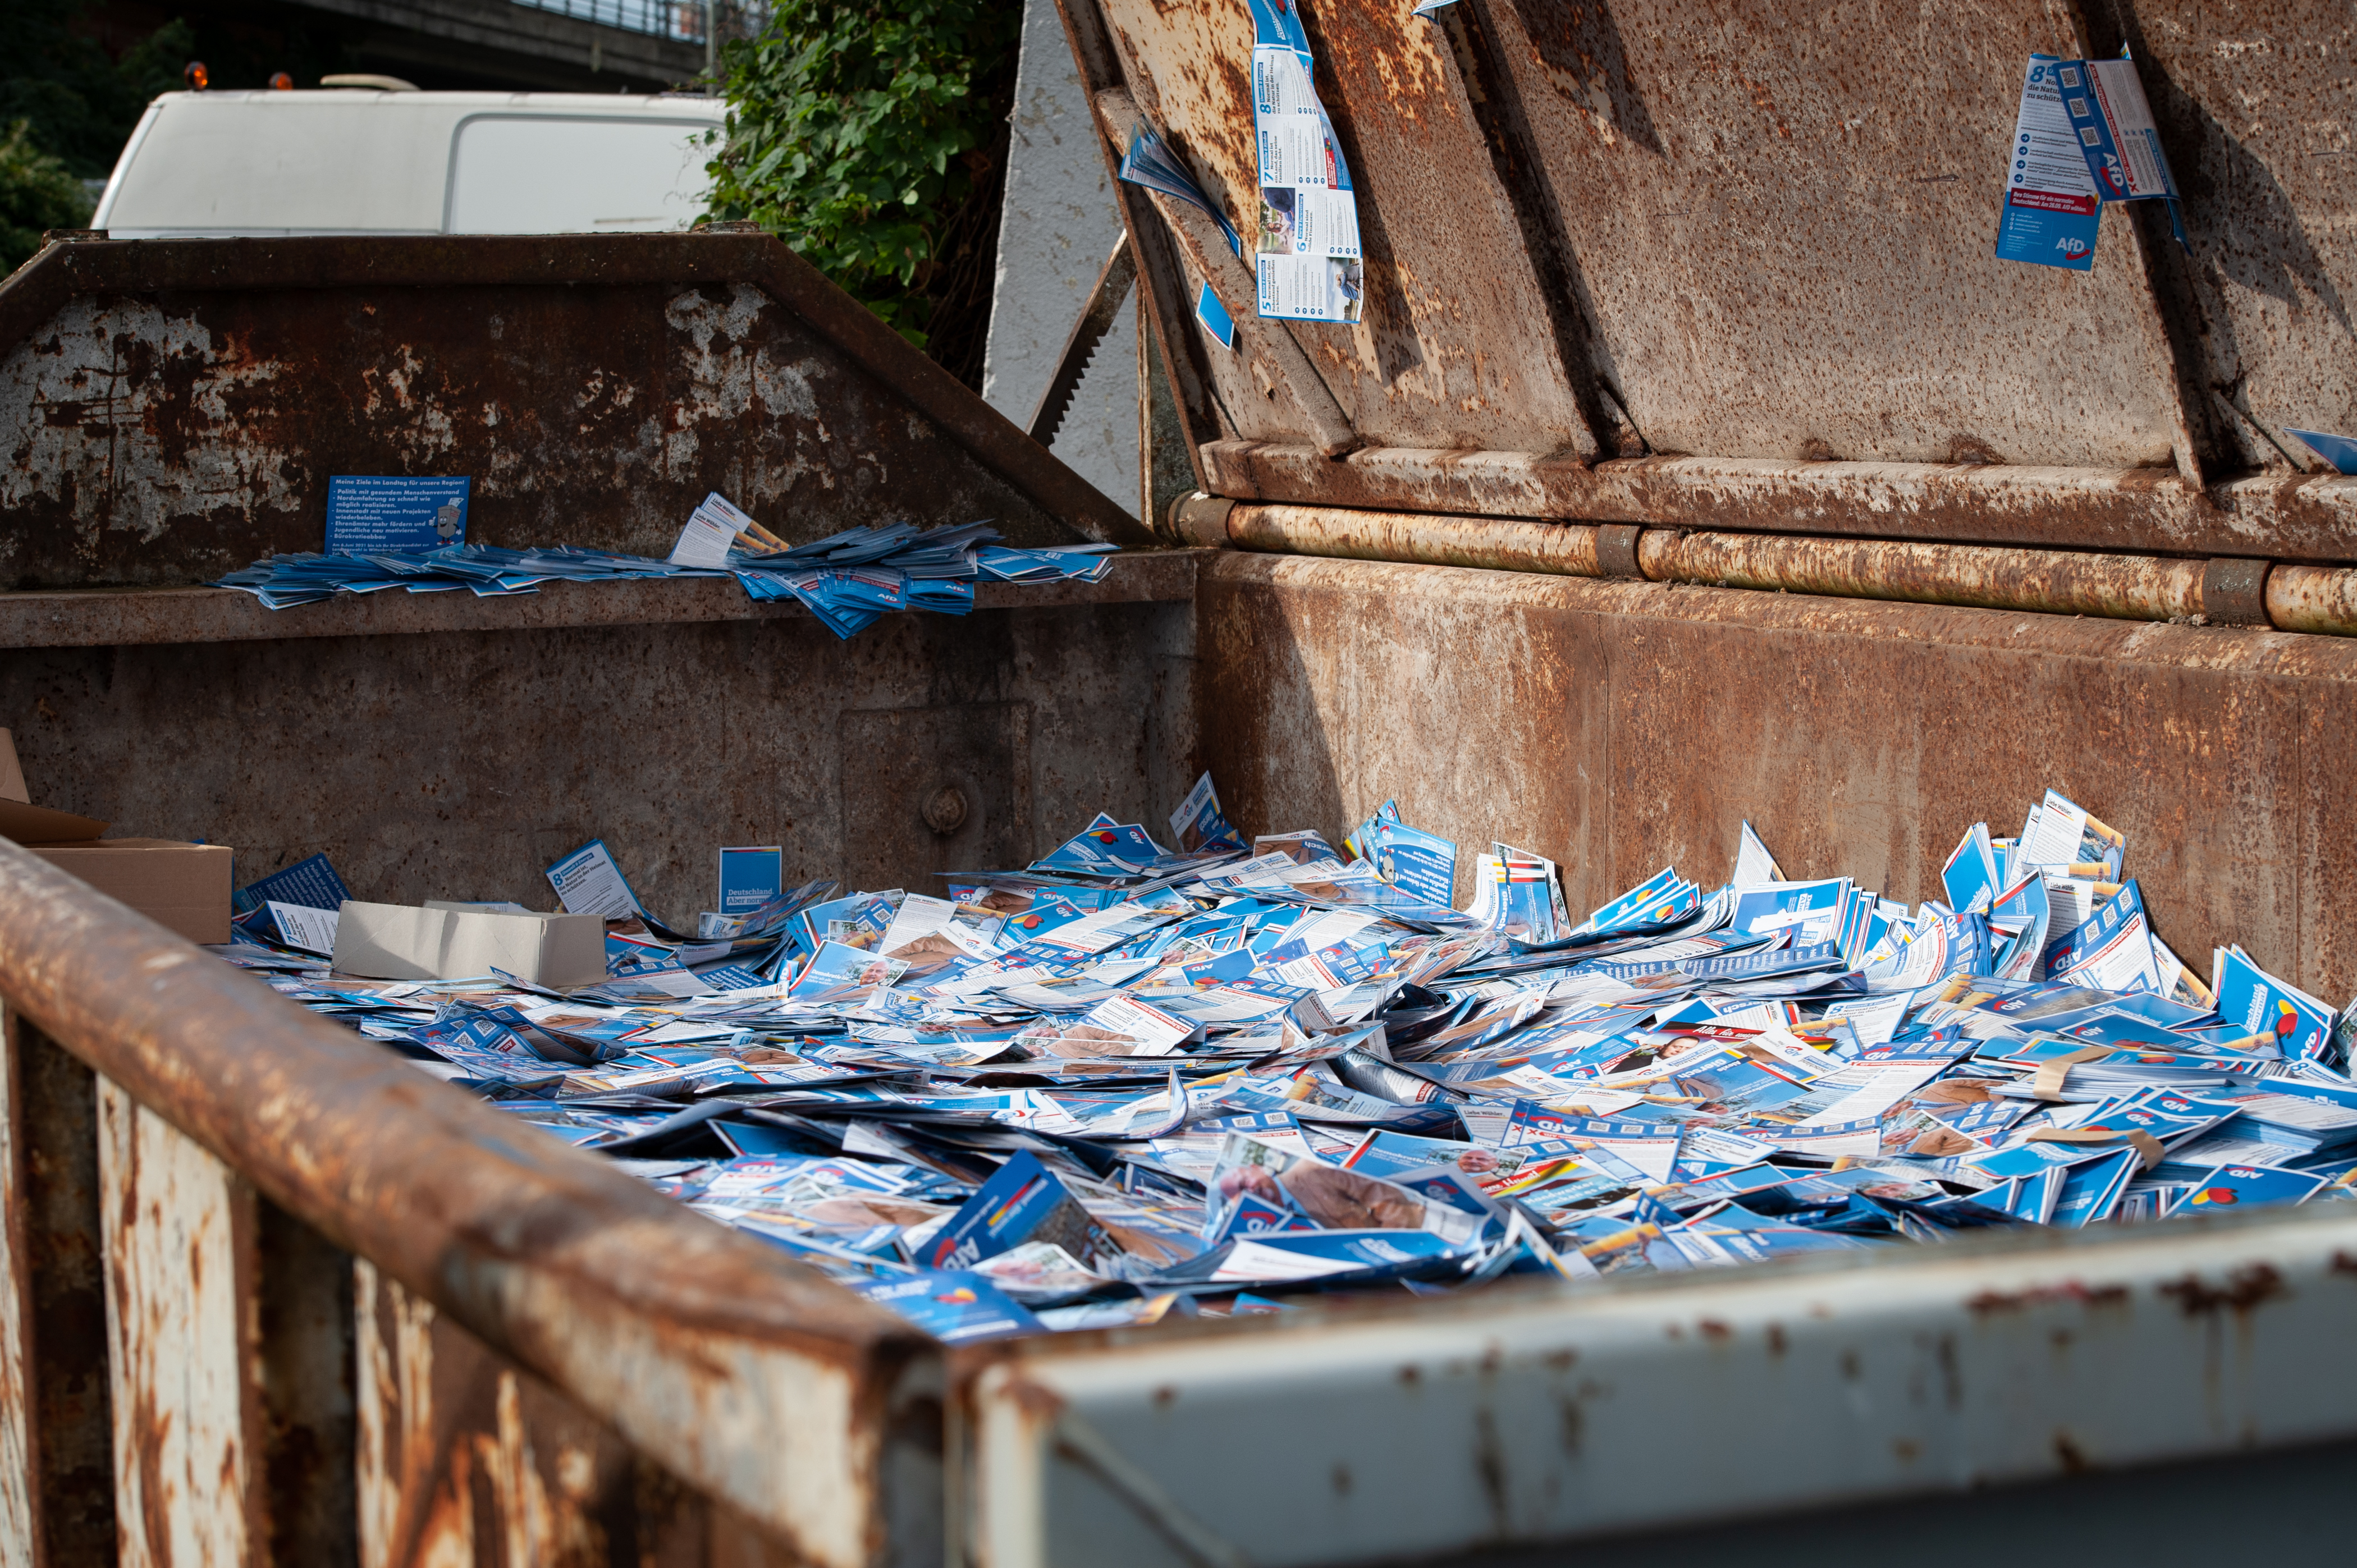 An overview of a waste container with AfD flyers.